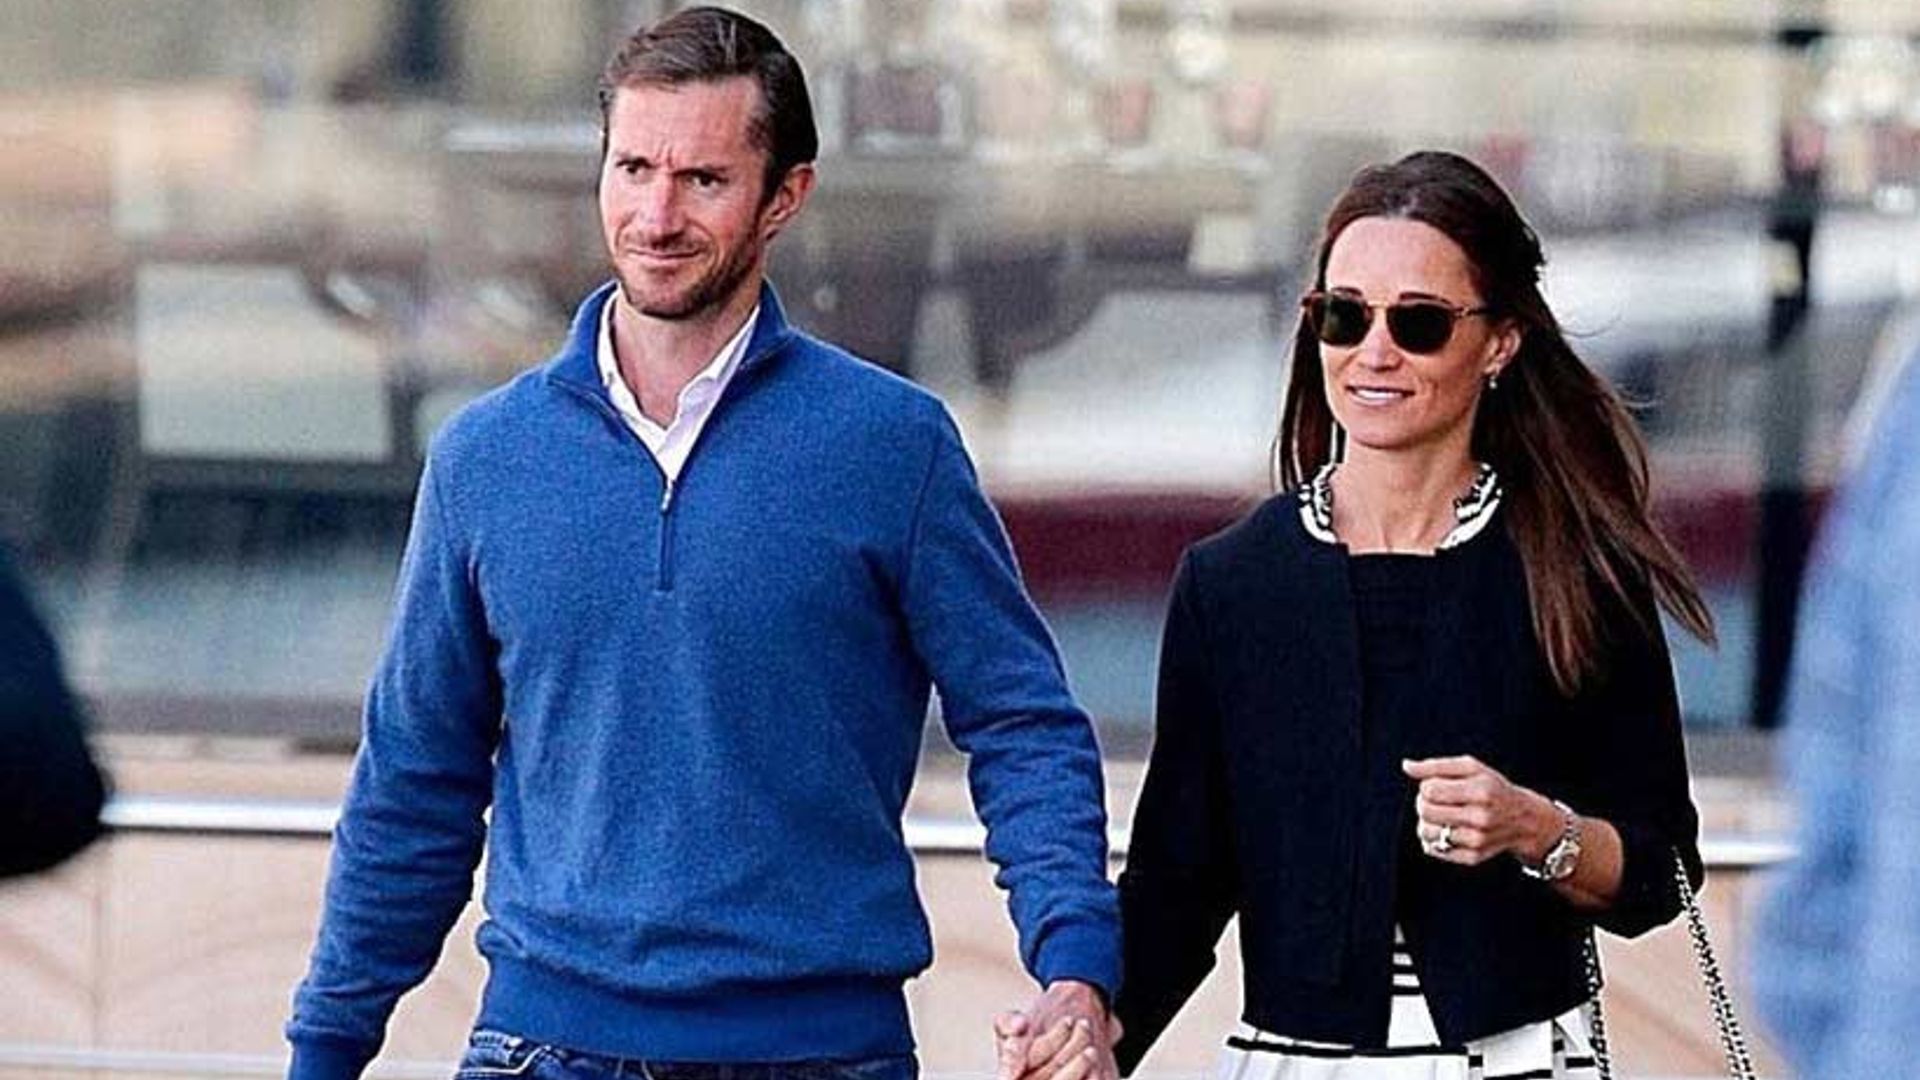 Pippa Middleton and James Matthews jet off to Perth for the fourth leg of their amazing honeymoon!